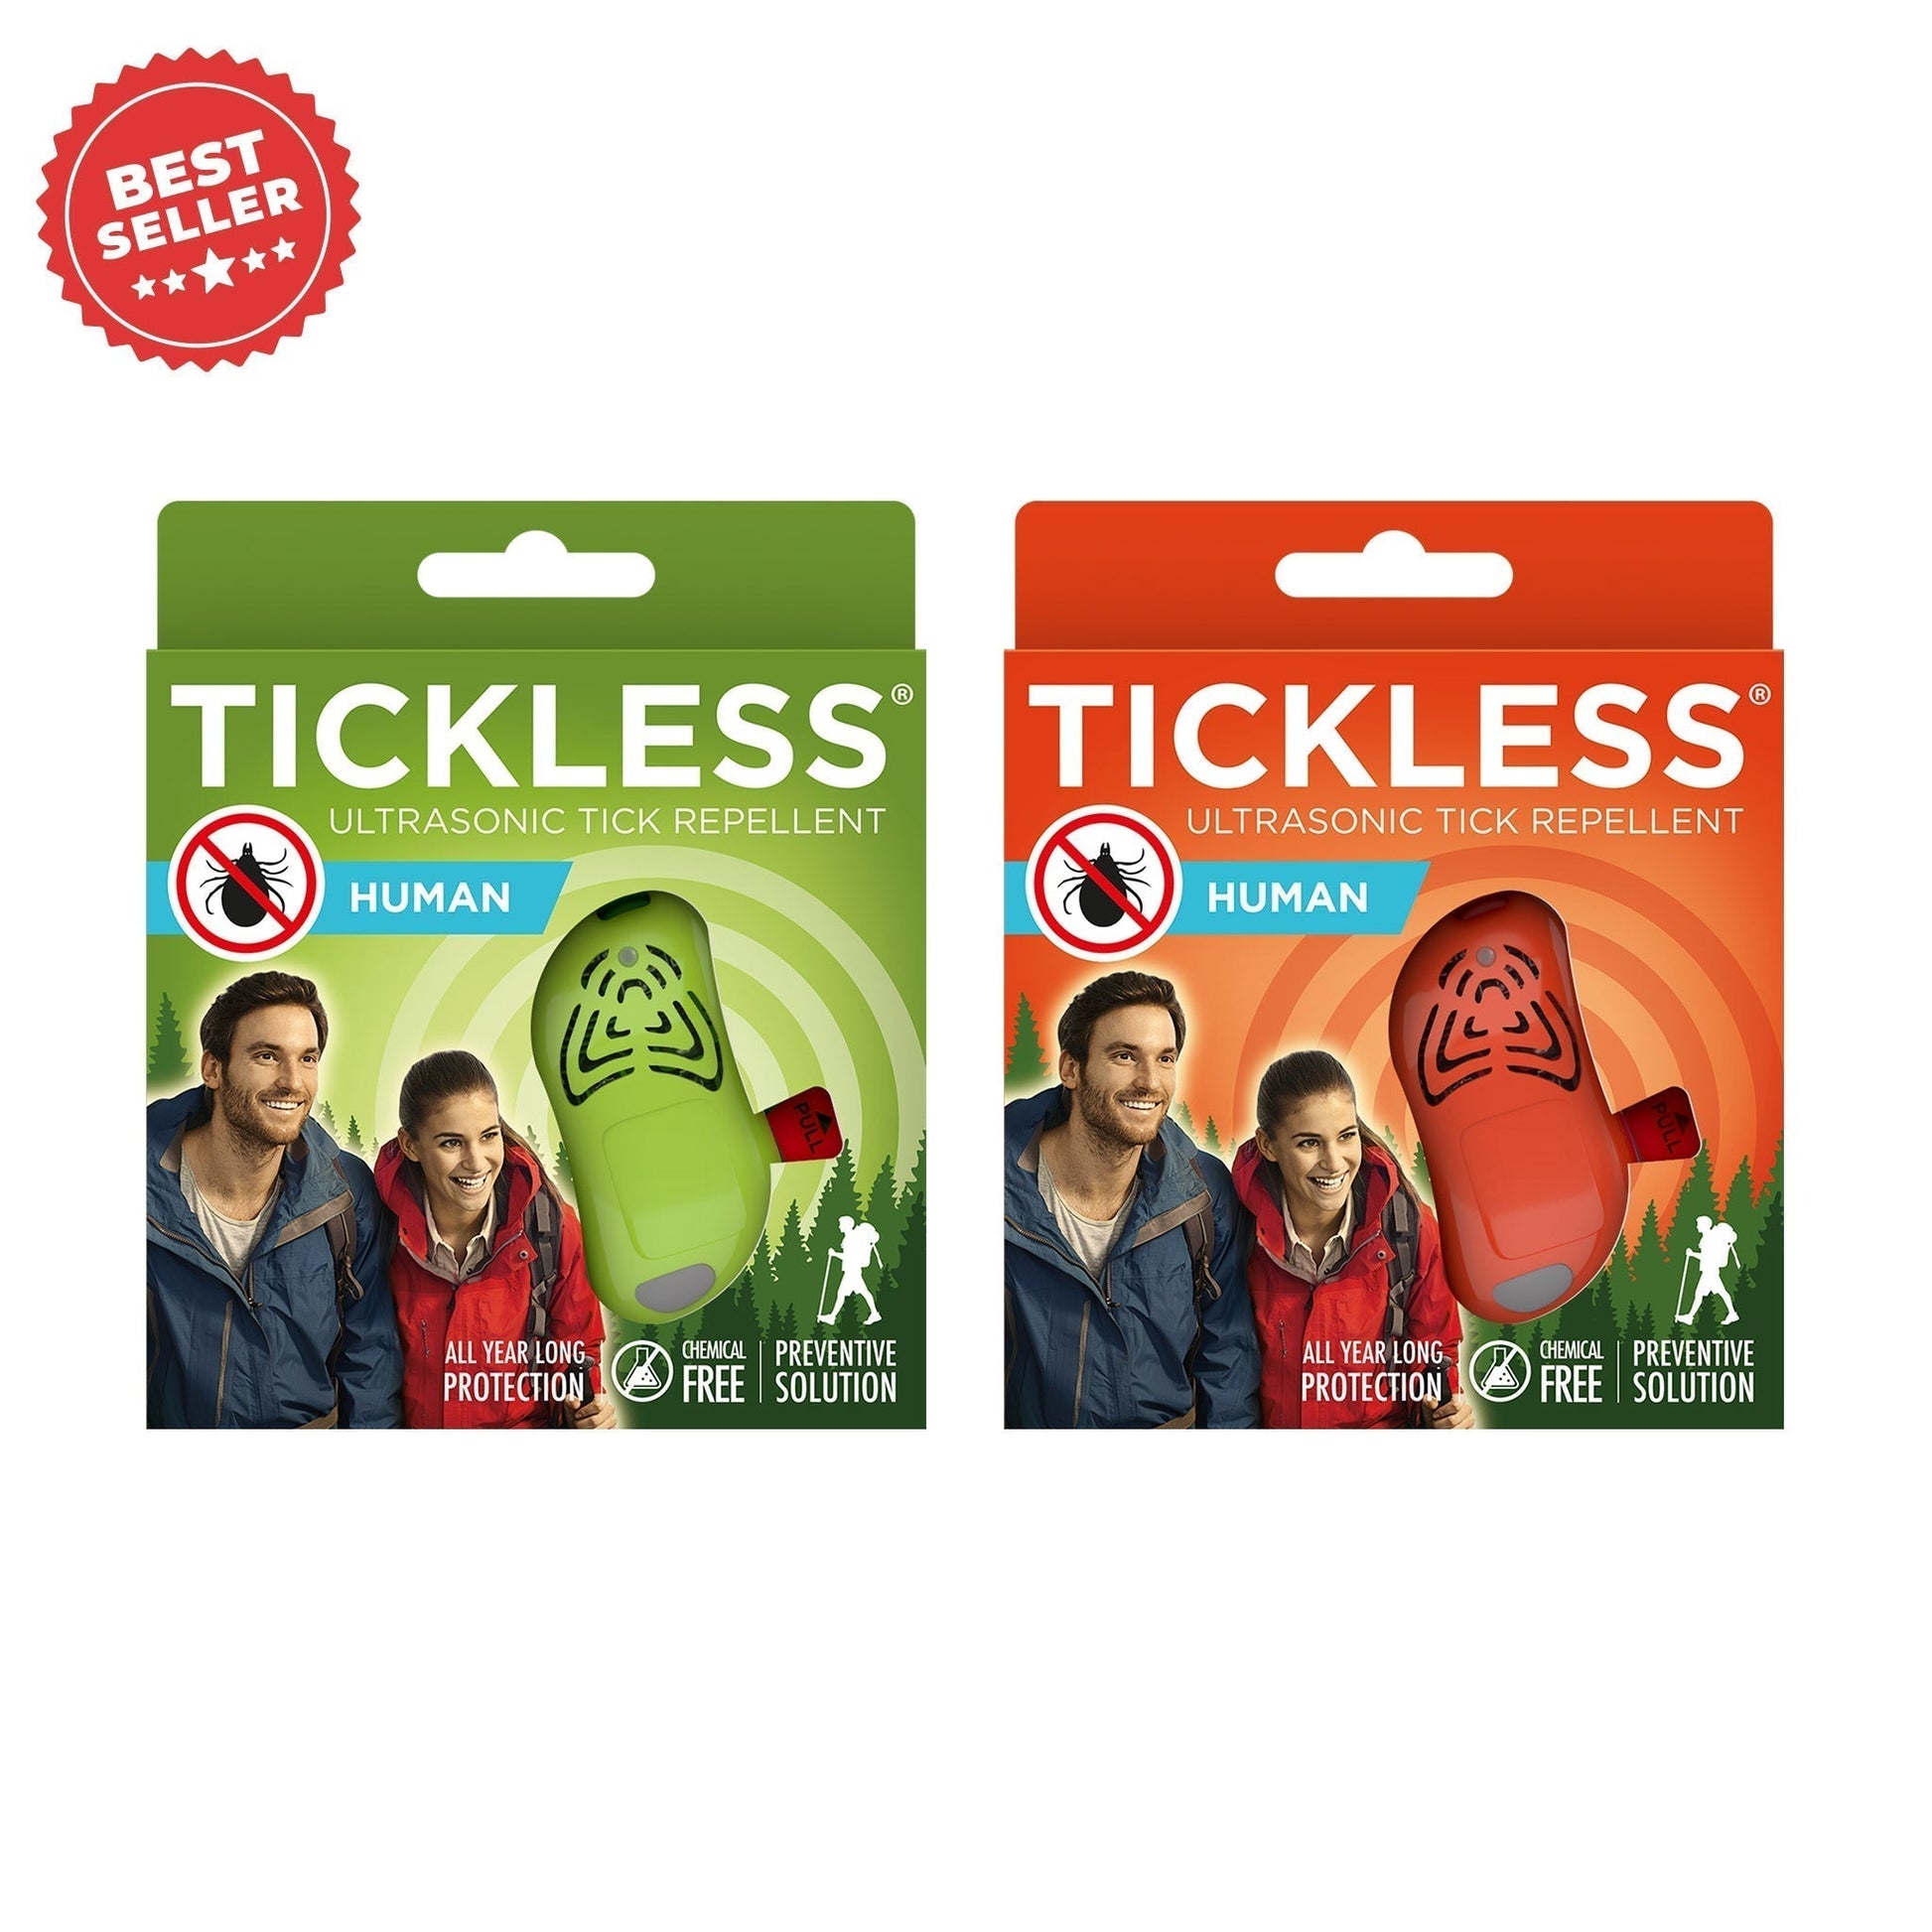 TicklessUSA Tickless Human Chemical-Free Tick Repellent for Adults sonicguard SonicGuard sonicguardusa SonicGuardUSA tick repeller ultrasonic Tickless TicklessUSA tick and flea repellent safe